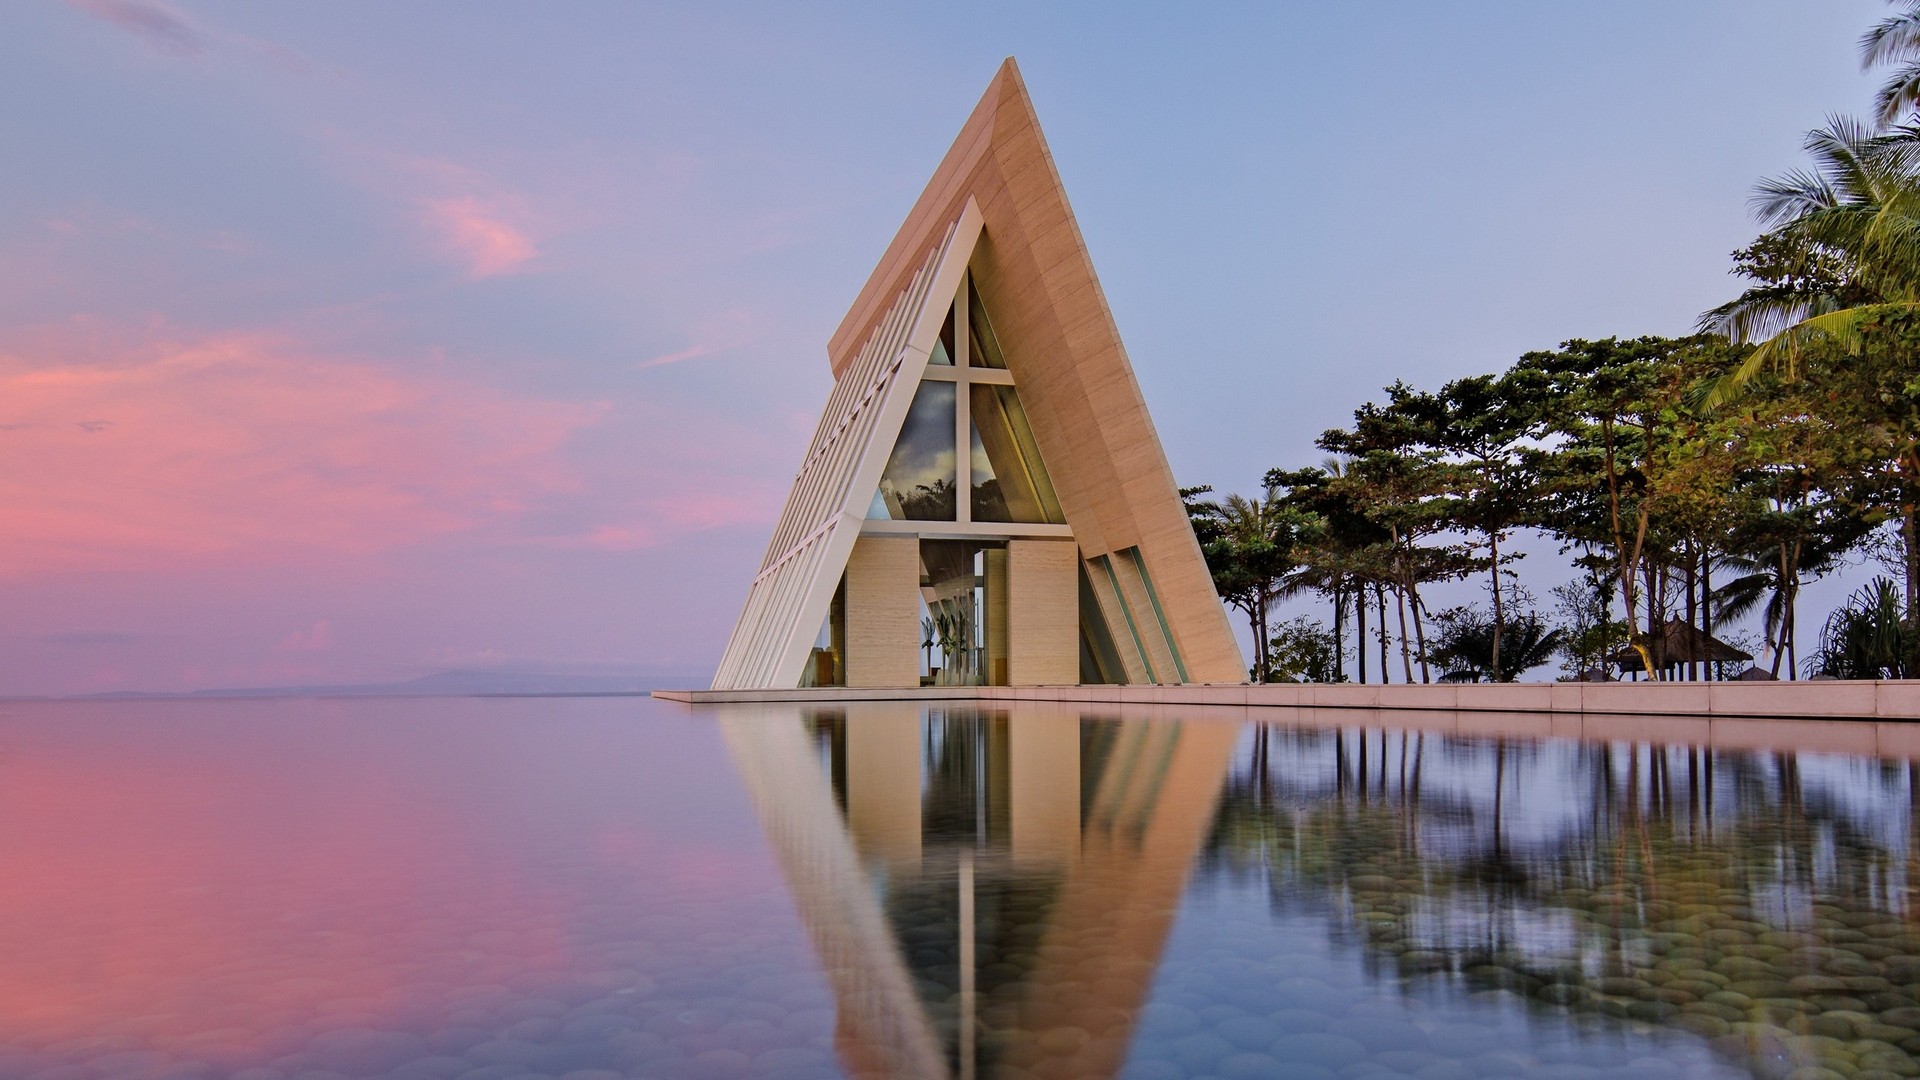 General 1920x1080 sunset sea water building architecture modern beach triangle house reflection